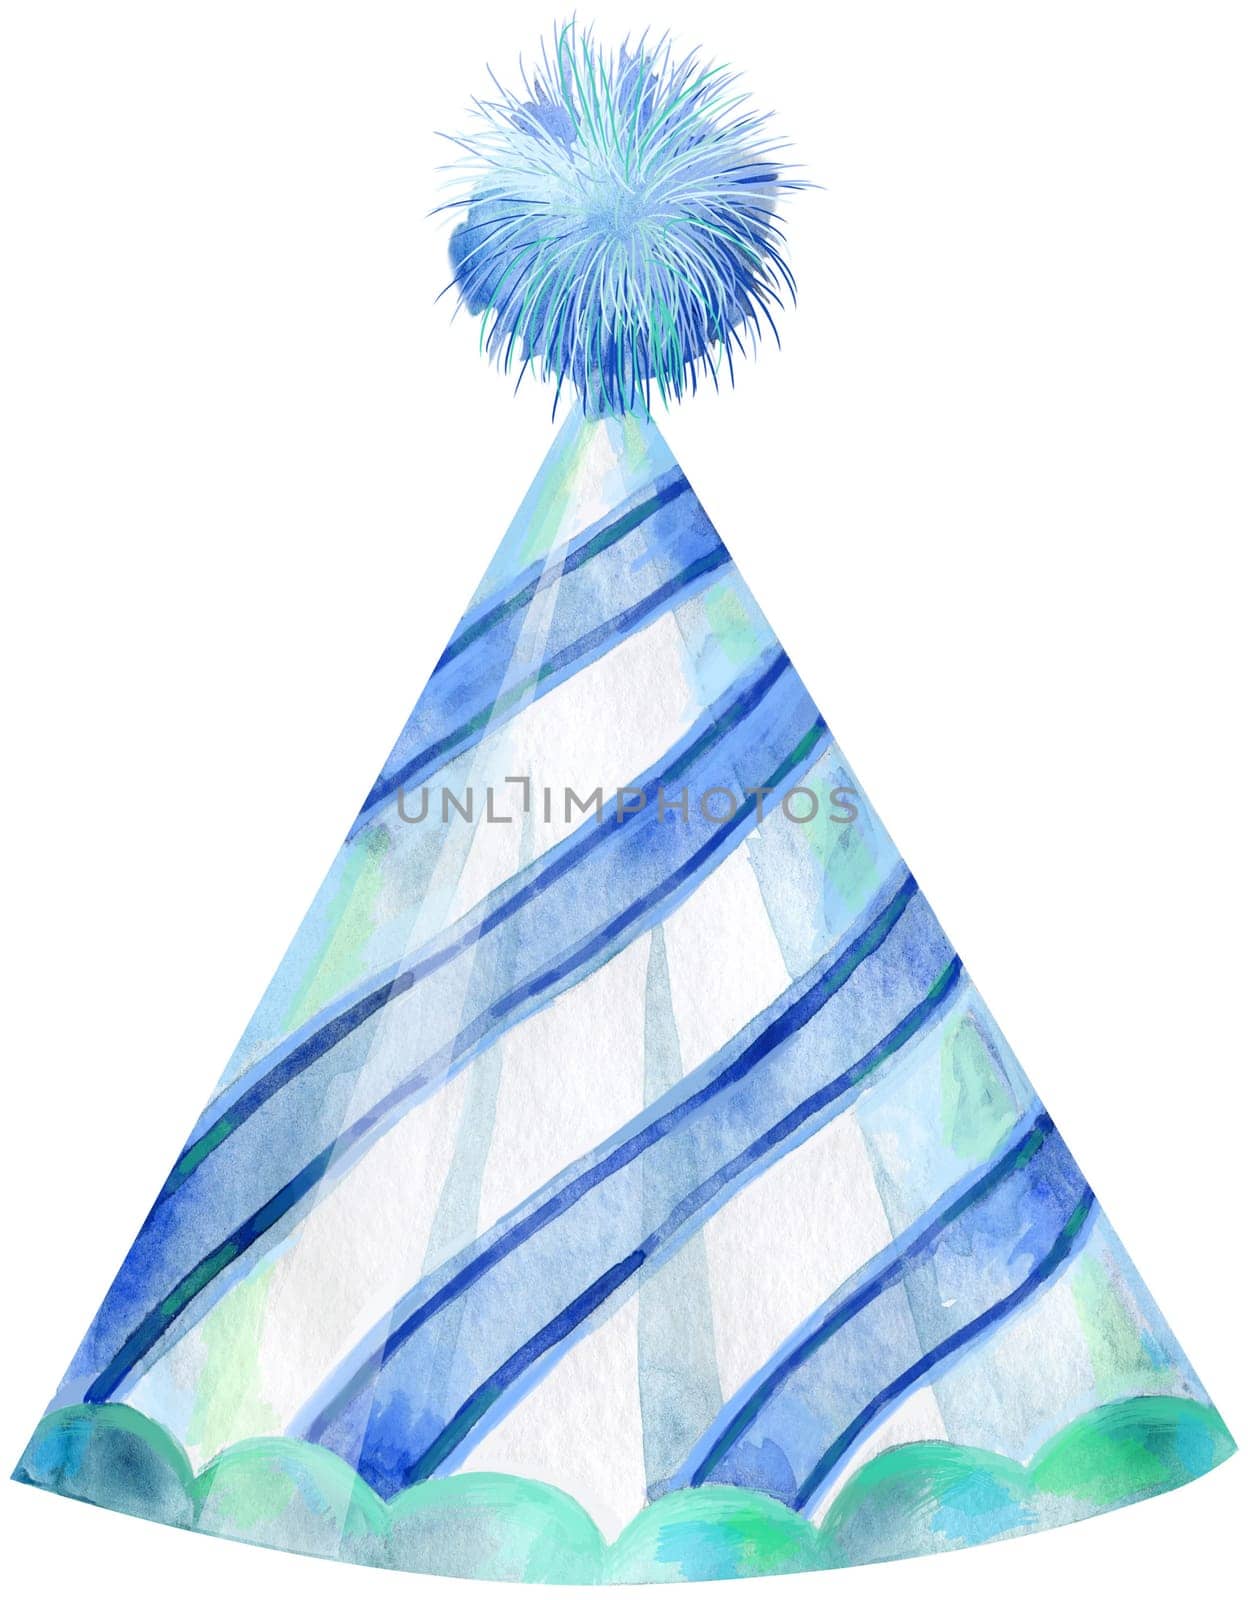 Party hat. Watercolor illustration. Birthday element by NataOmsk